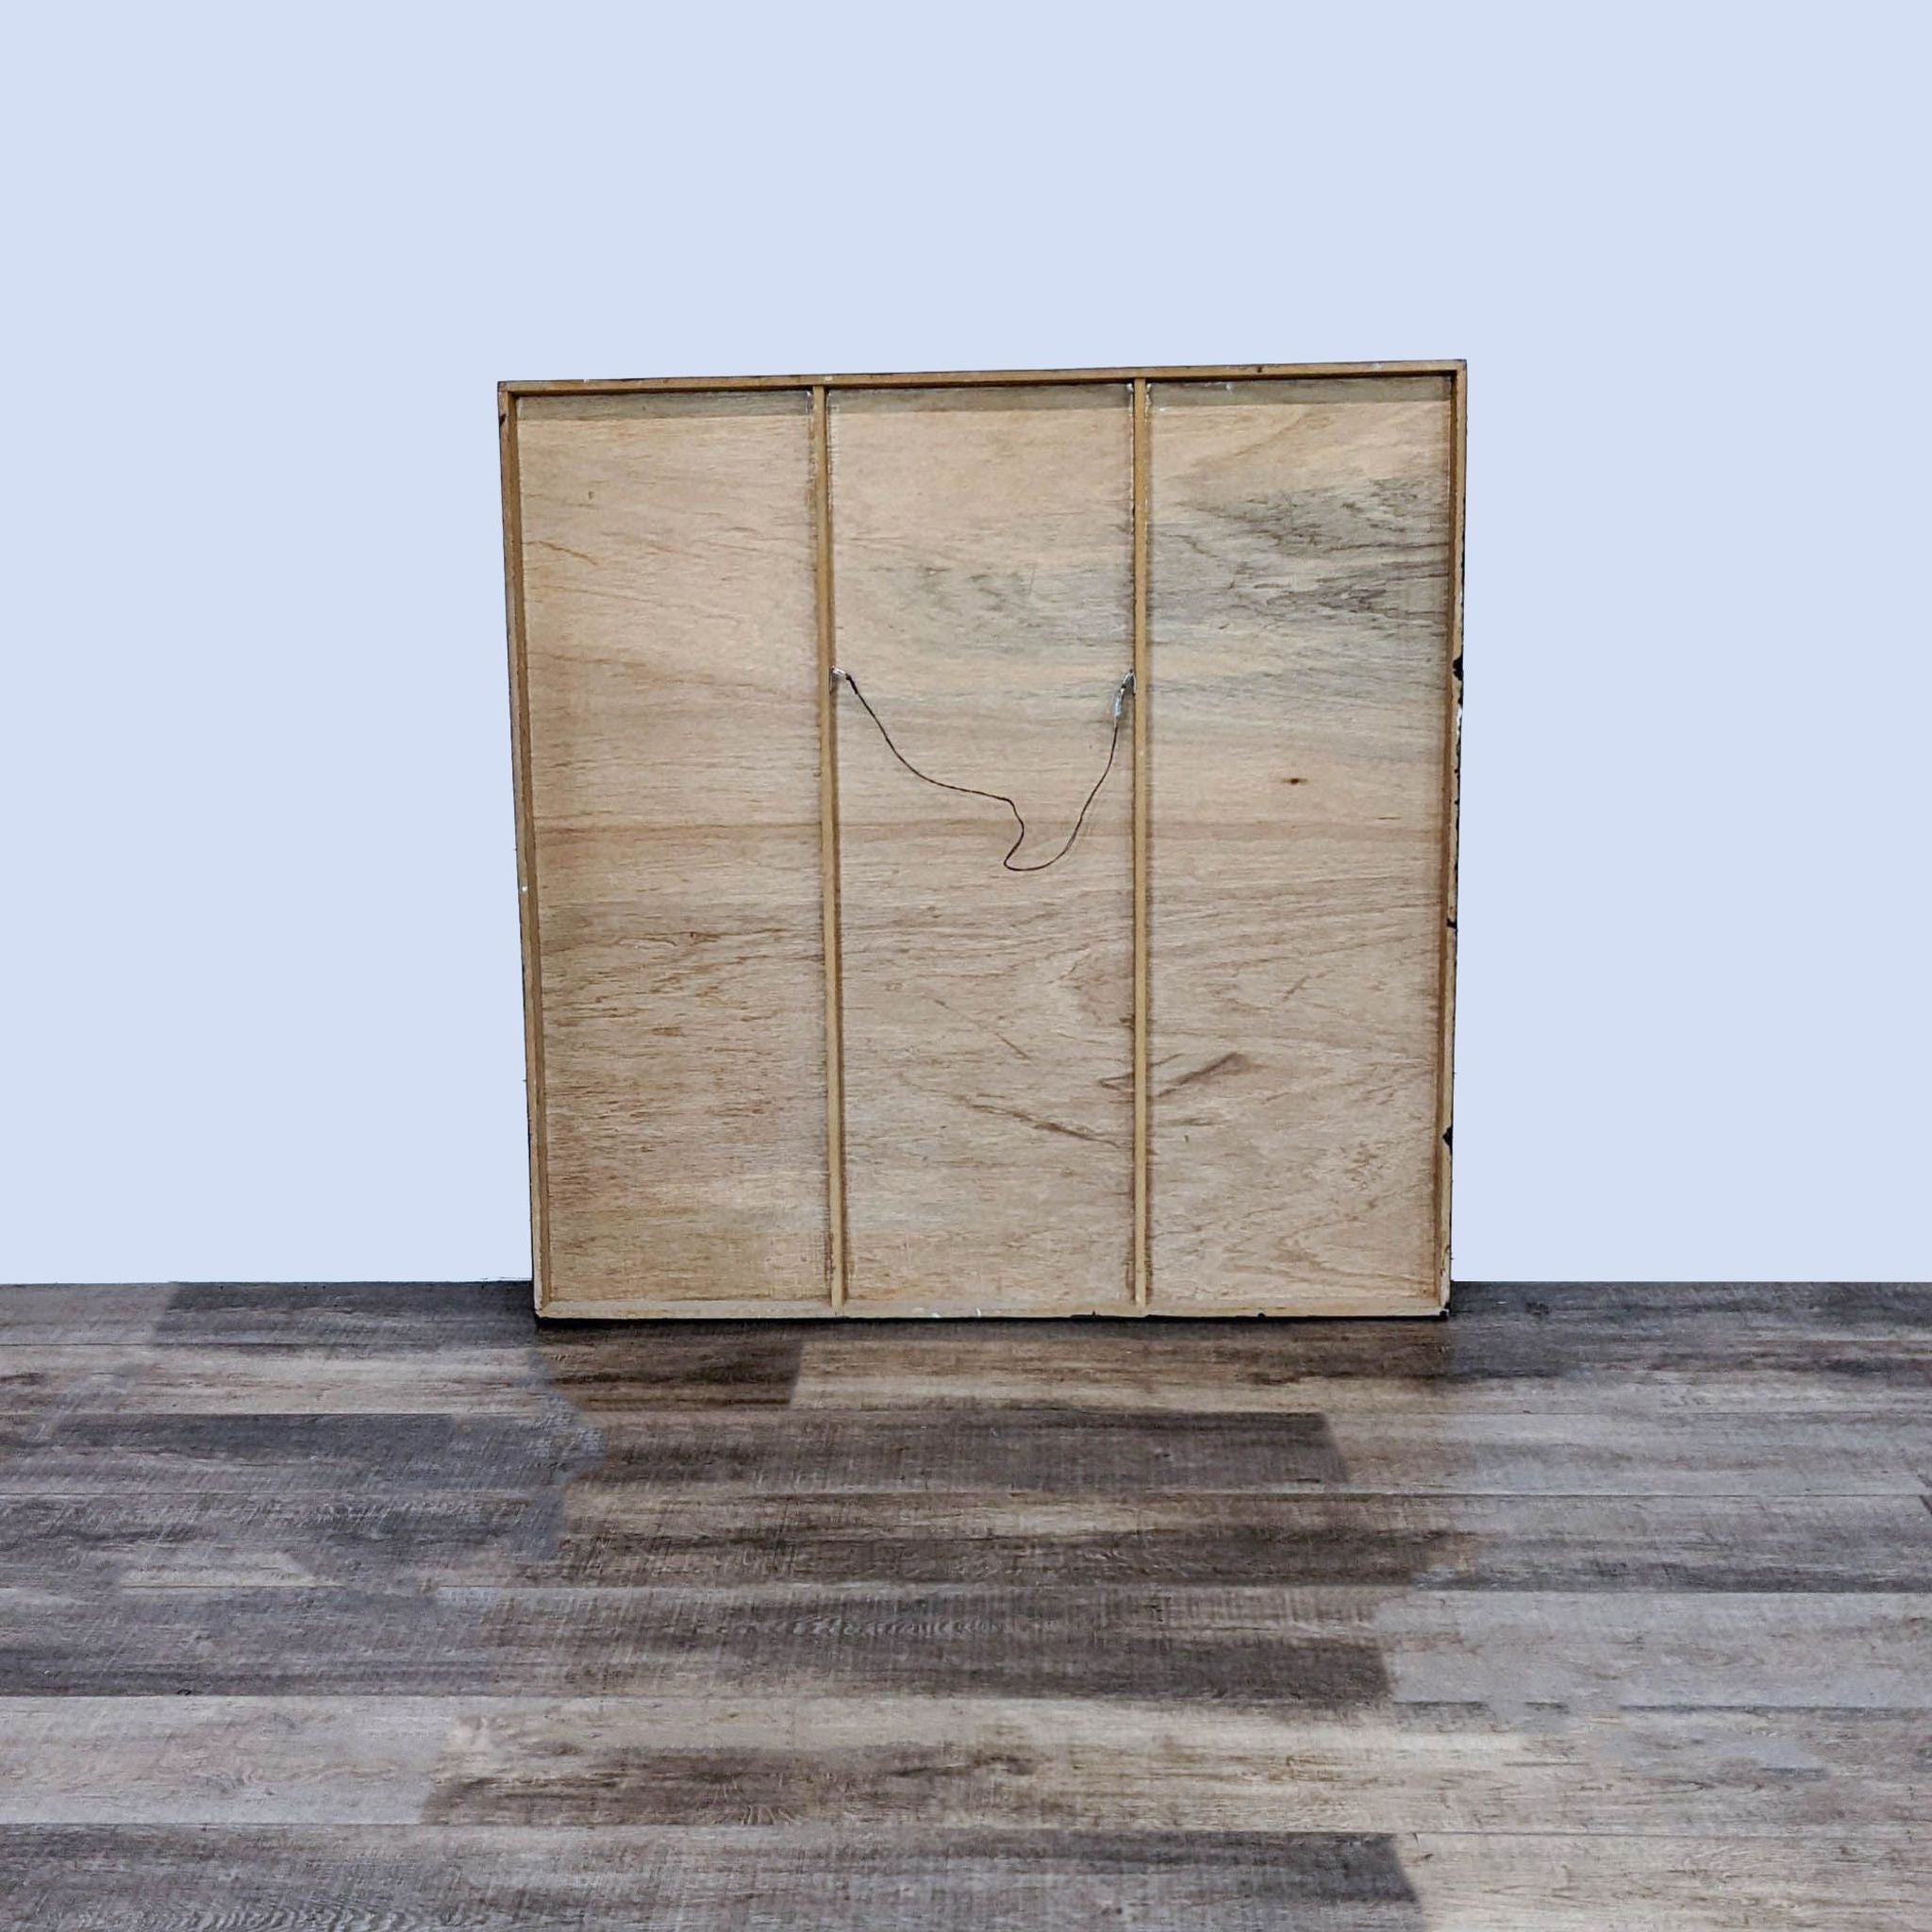 Reperch artwork's rear view, showing plain wood canvas stretcher with wire, standing on a wooden floor against a grey wall.